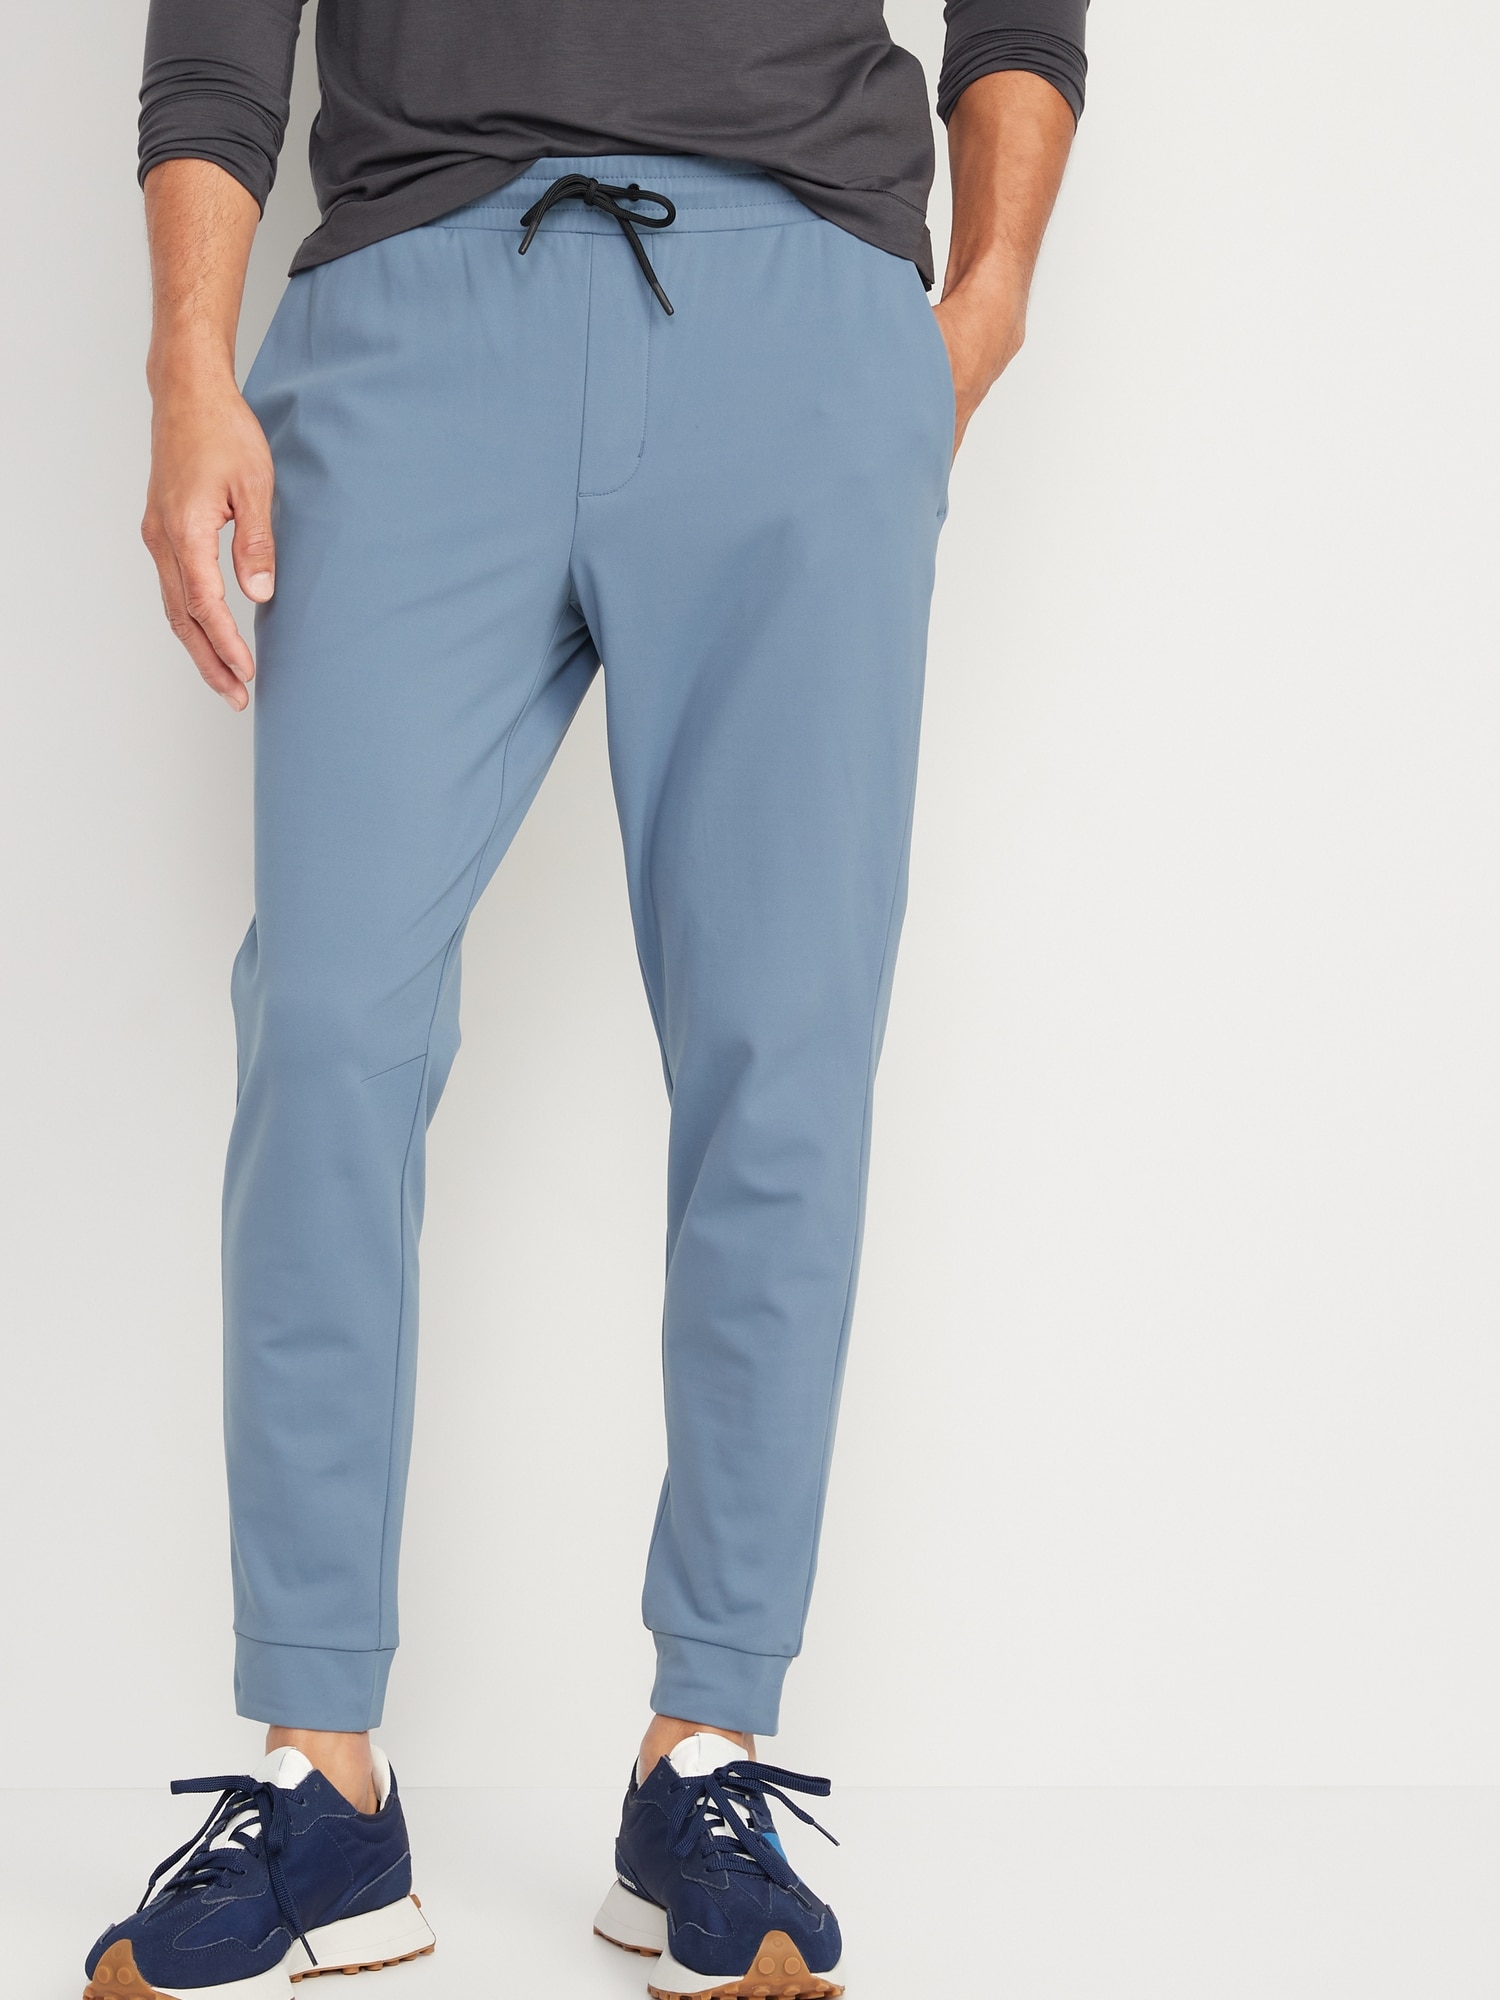 Today Only! Old Navy Women's Powersoft Joggers $18 or Men's Go Dry